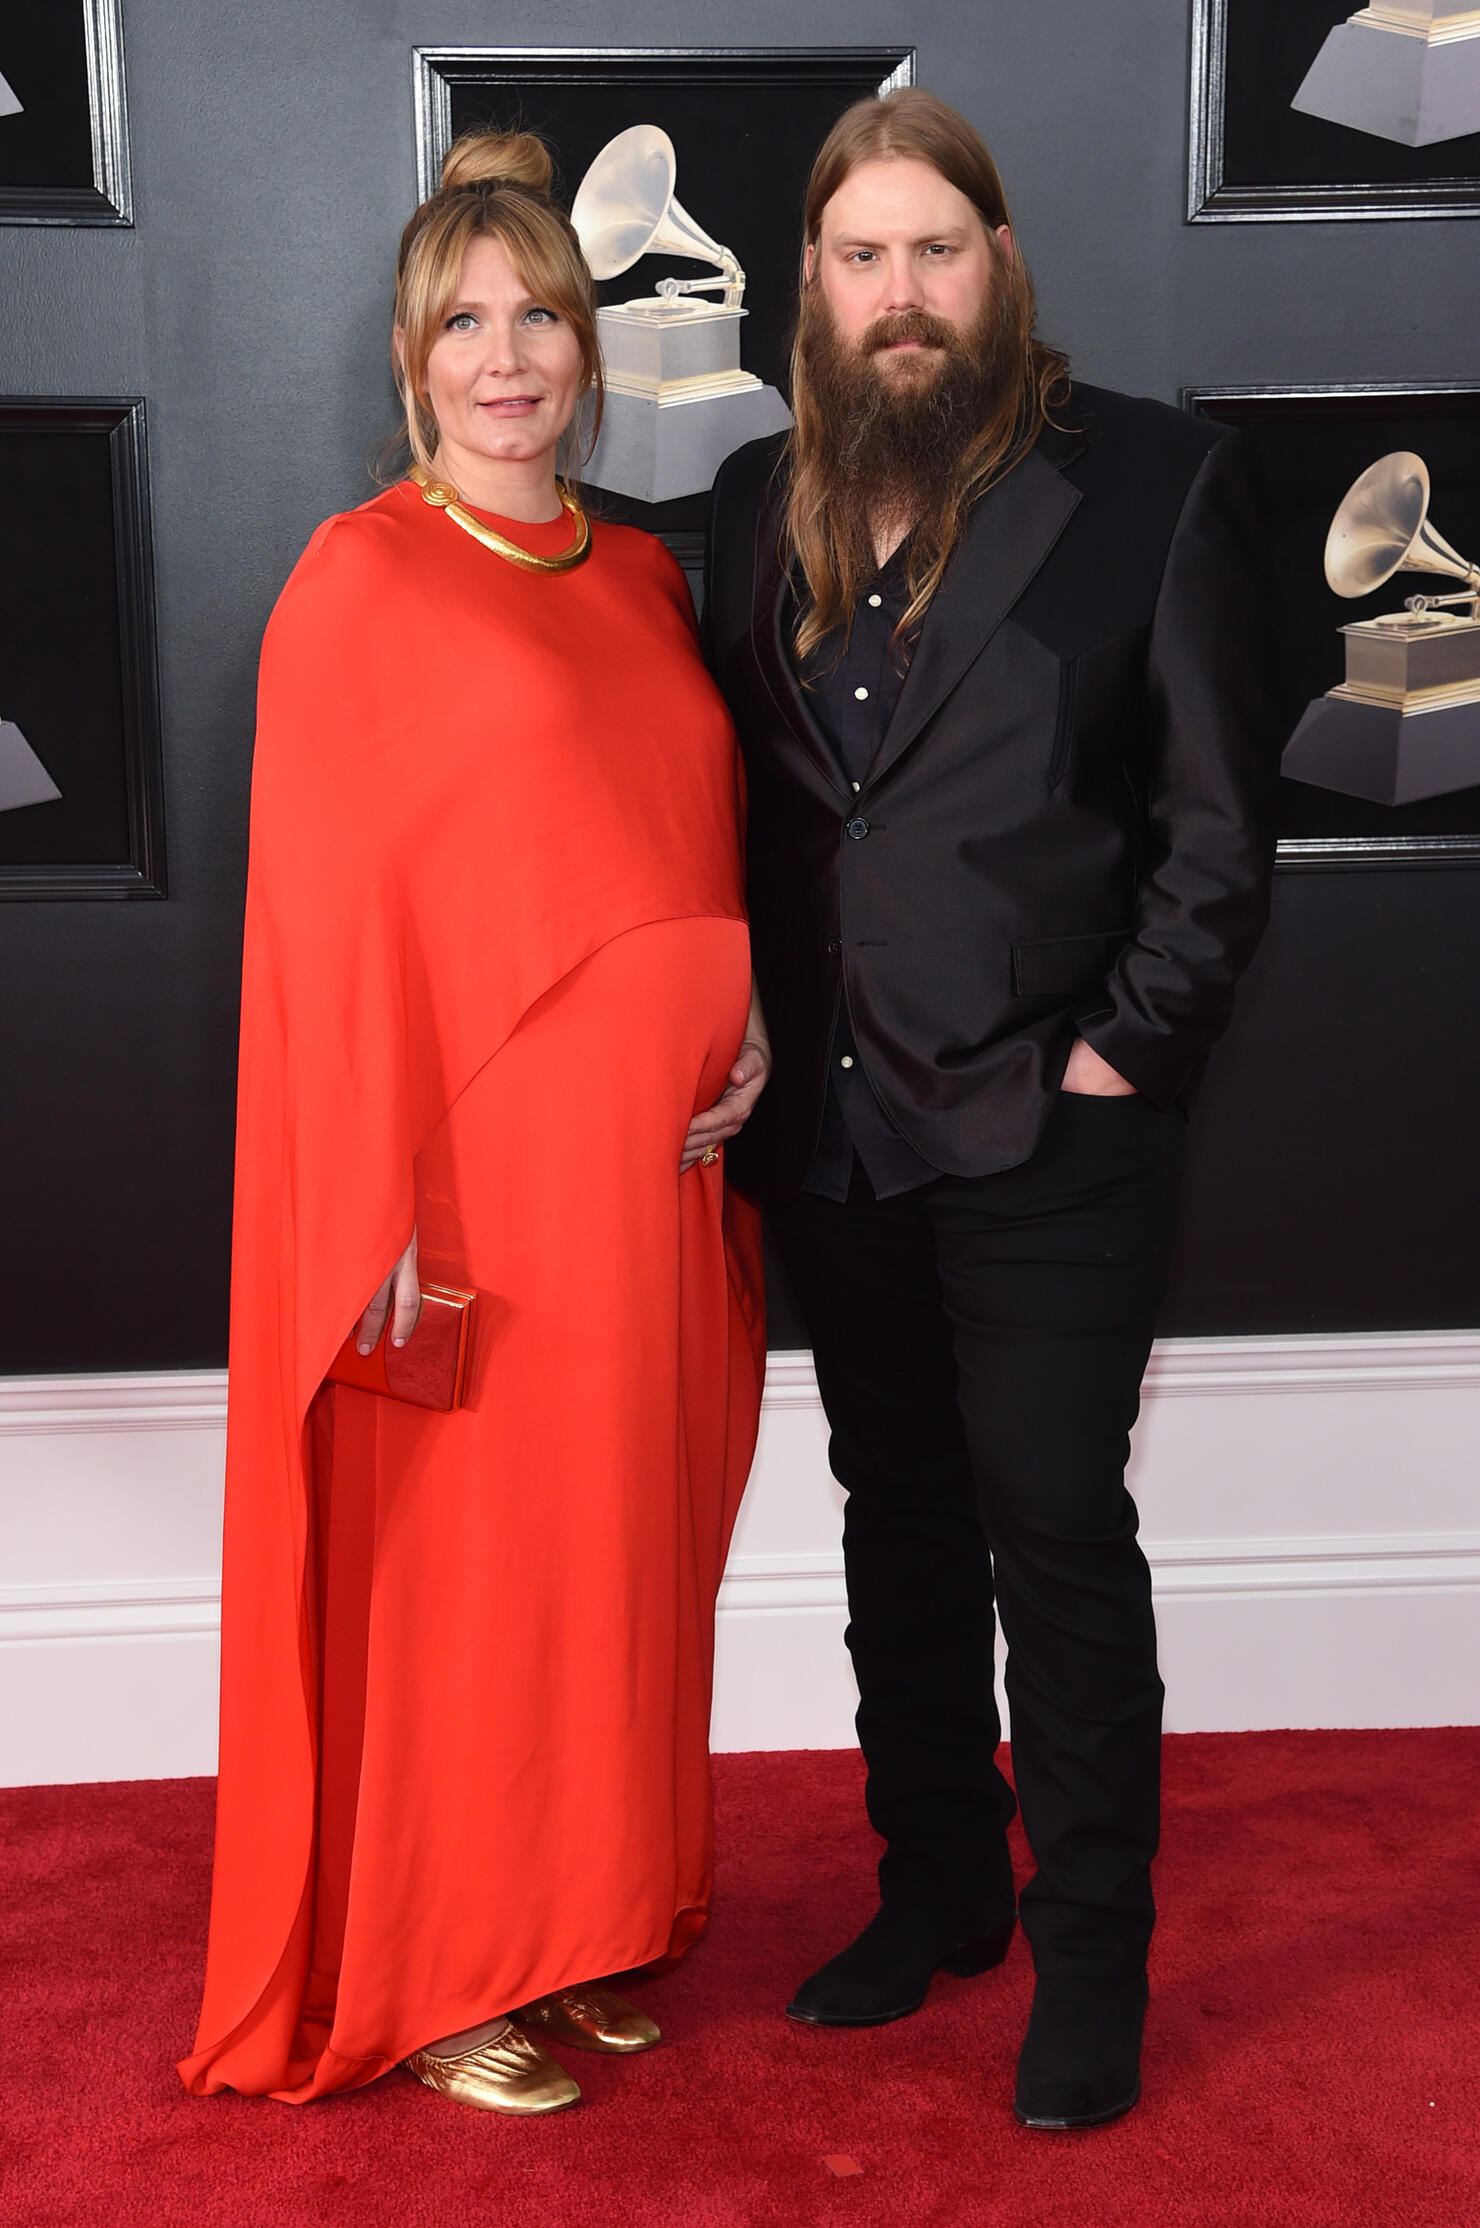 Chris and Morgane Stapleton (Getty Images)